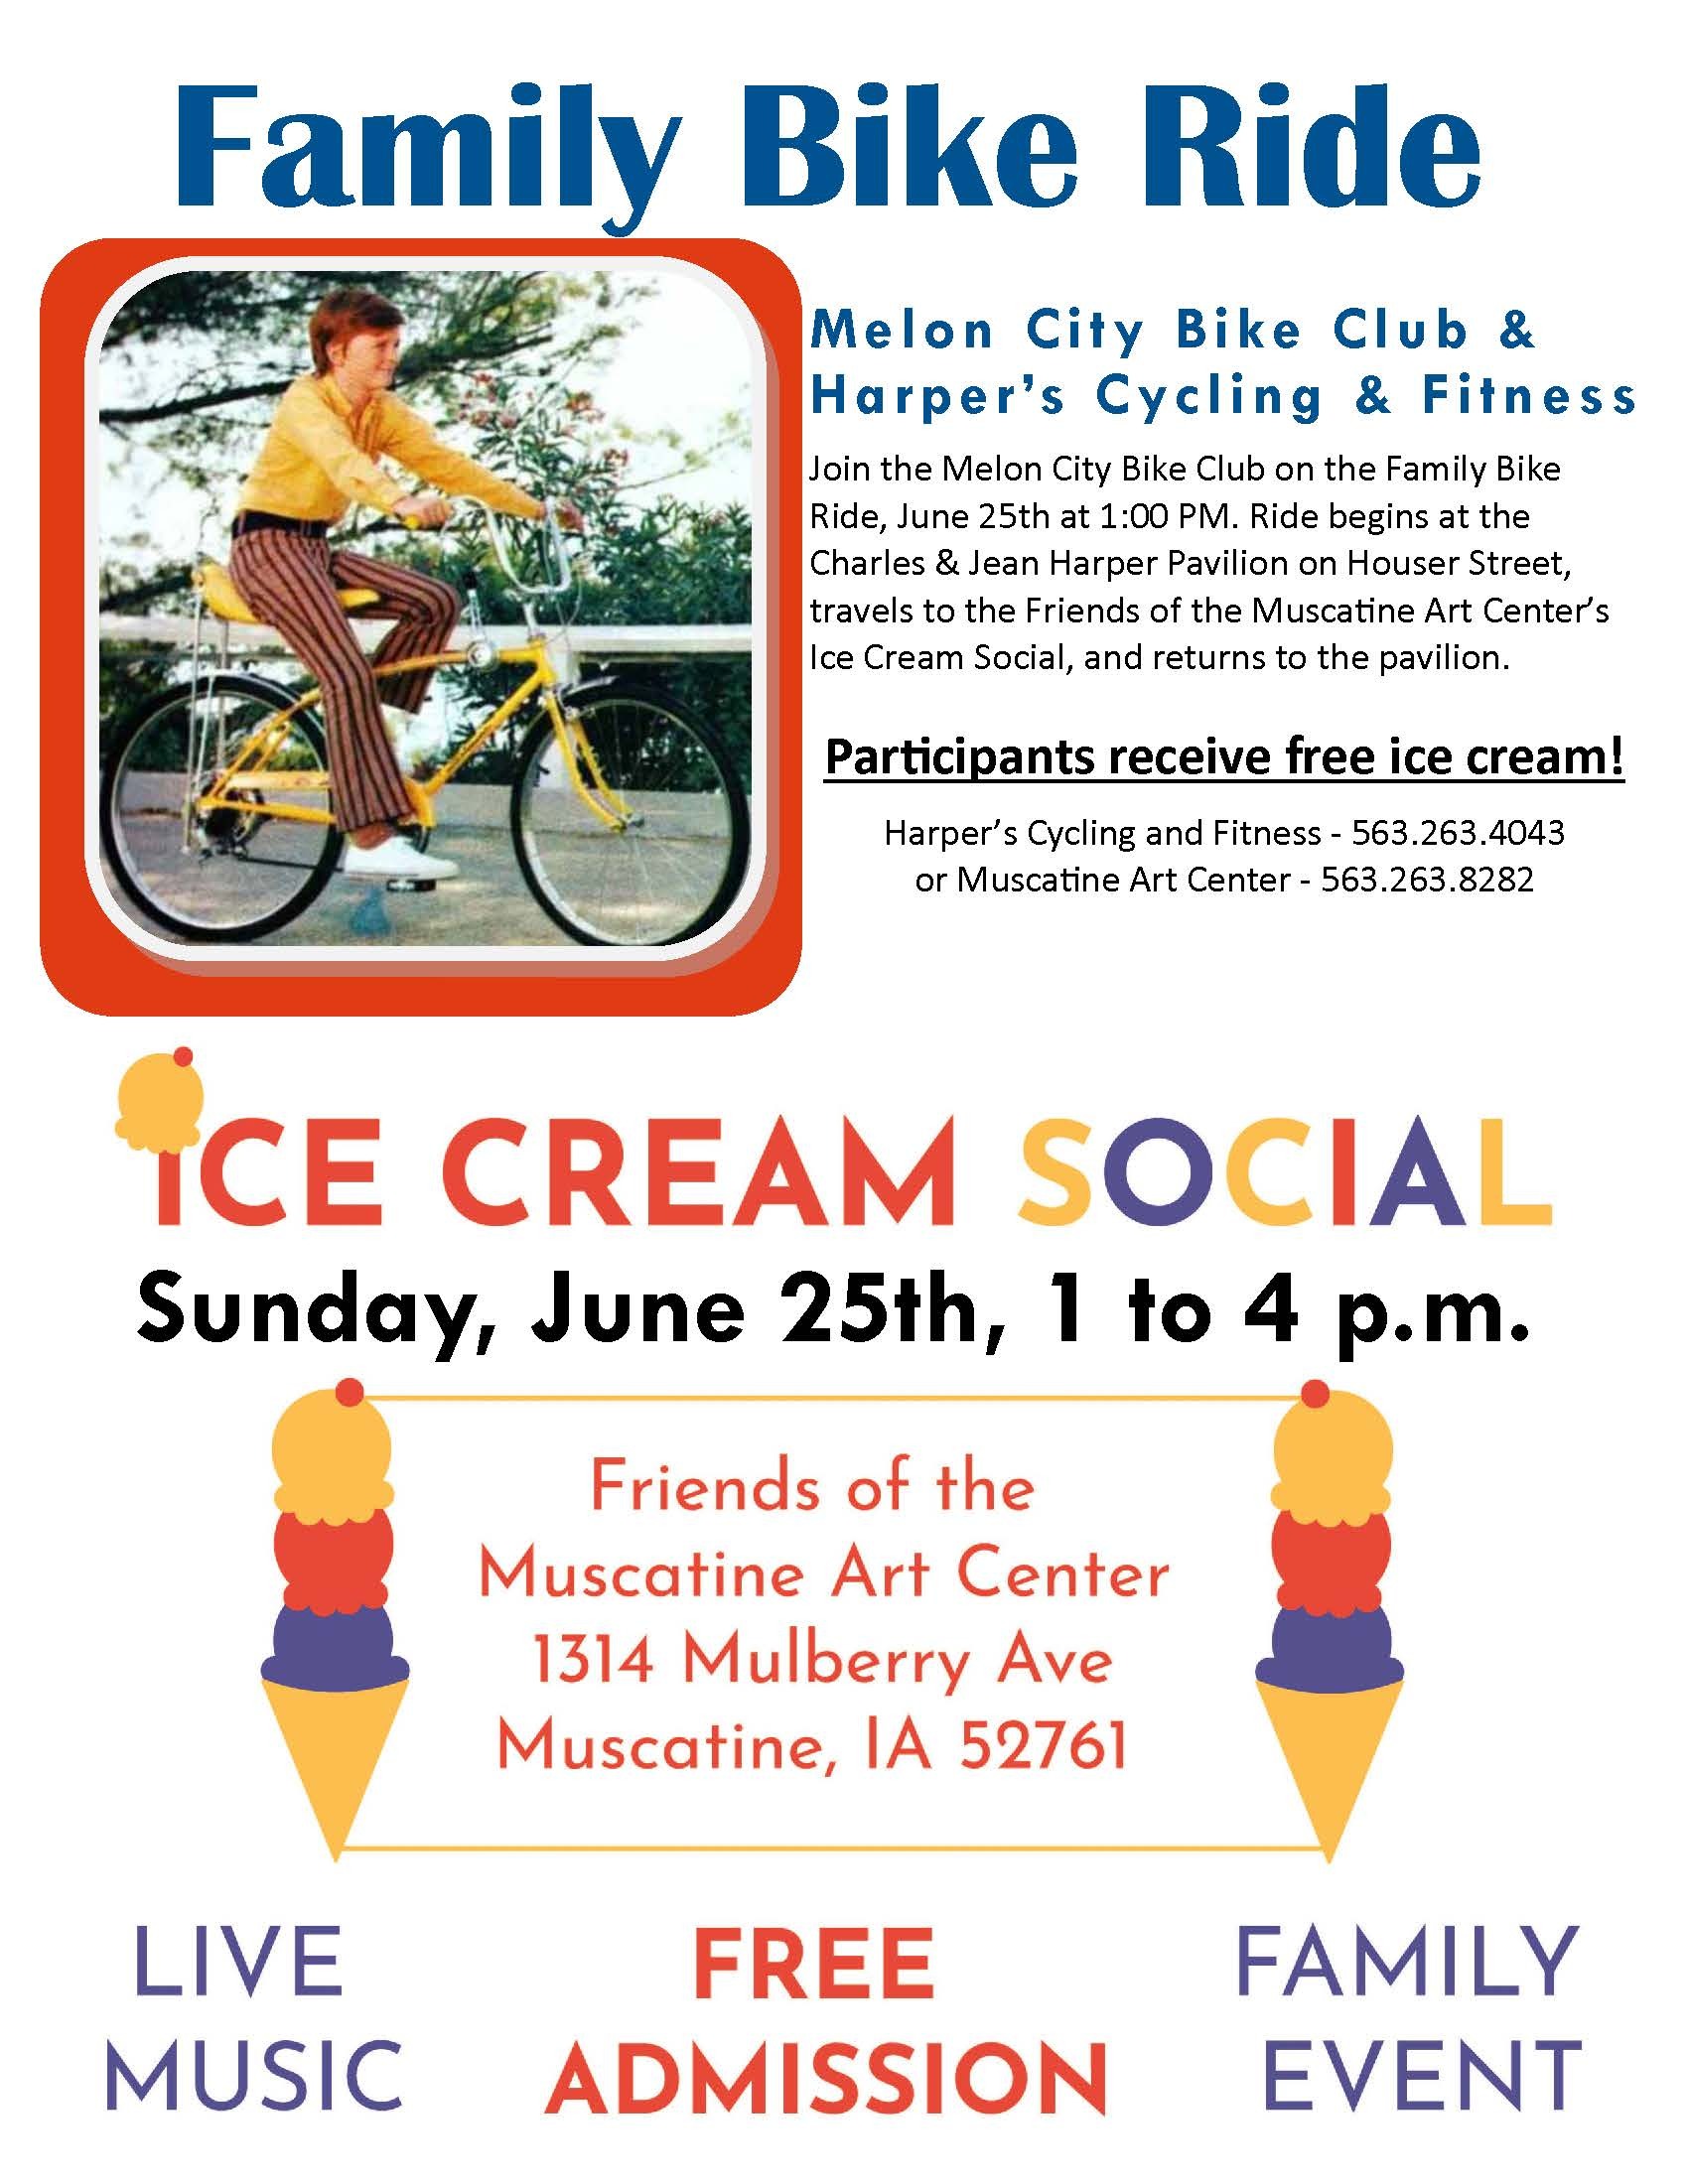 Friends of the Muscatine Art Center Annual Ice Cream Social - June 25 Image